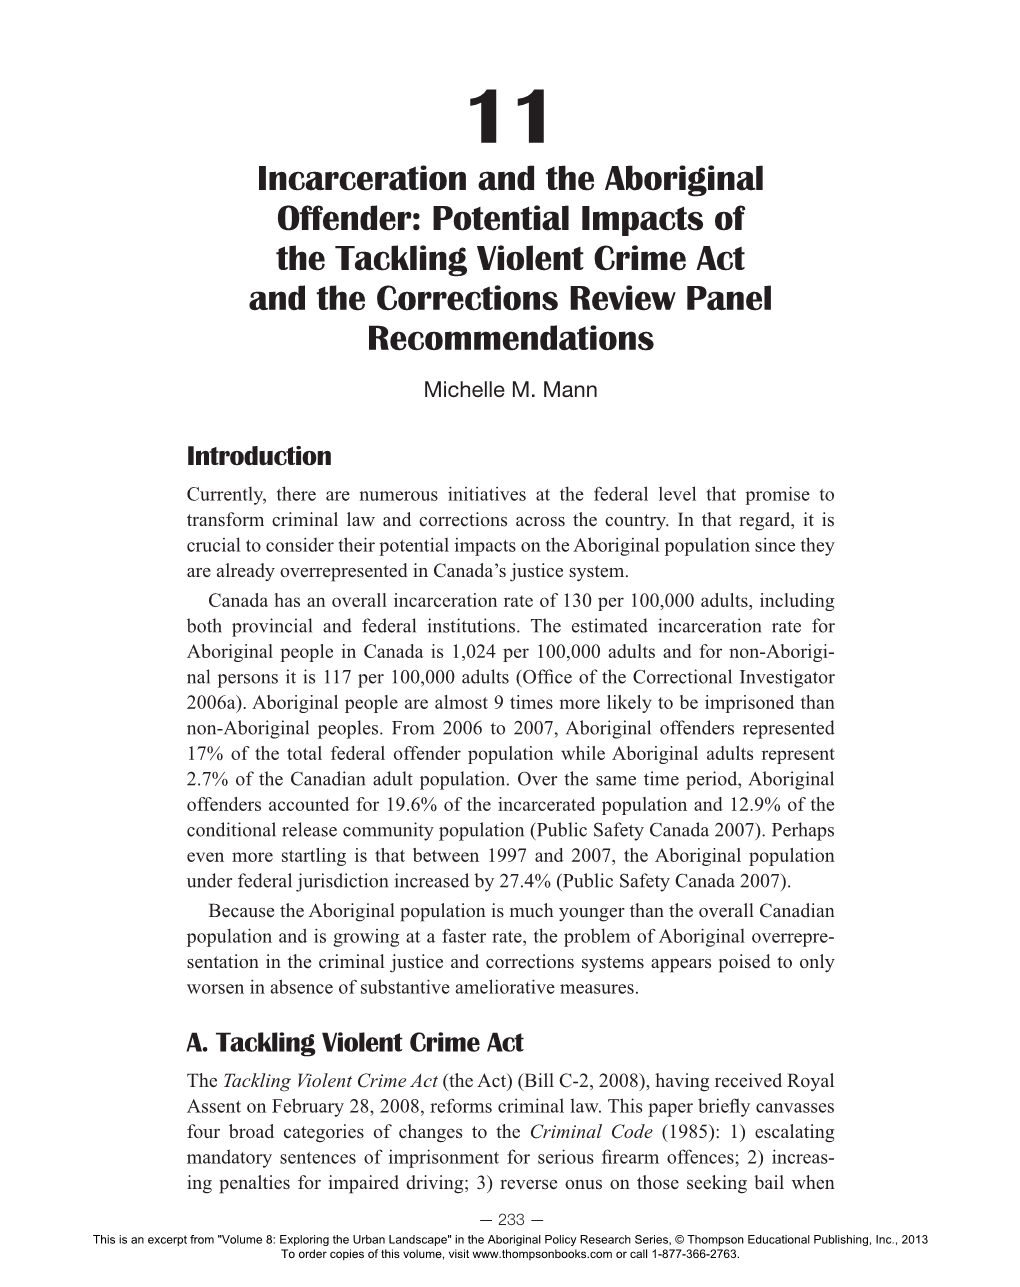 Incarceration and the Aboriginal Offender: Potential Impacts of the Tackling Violent Crime Act and the Corrections Review Panel Recommendations Michelle M